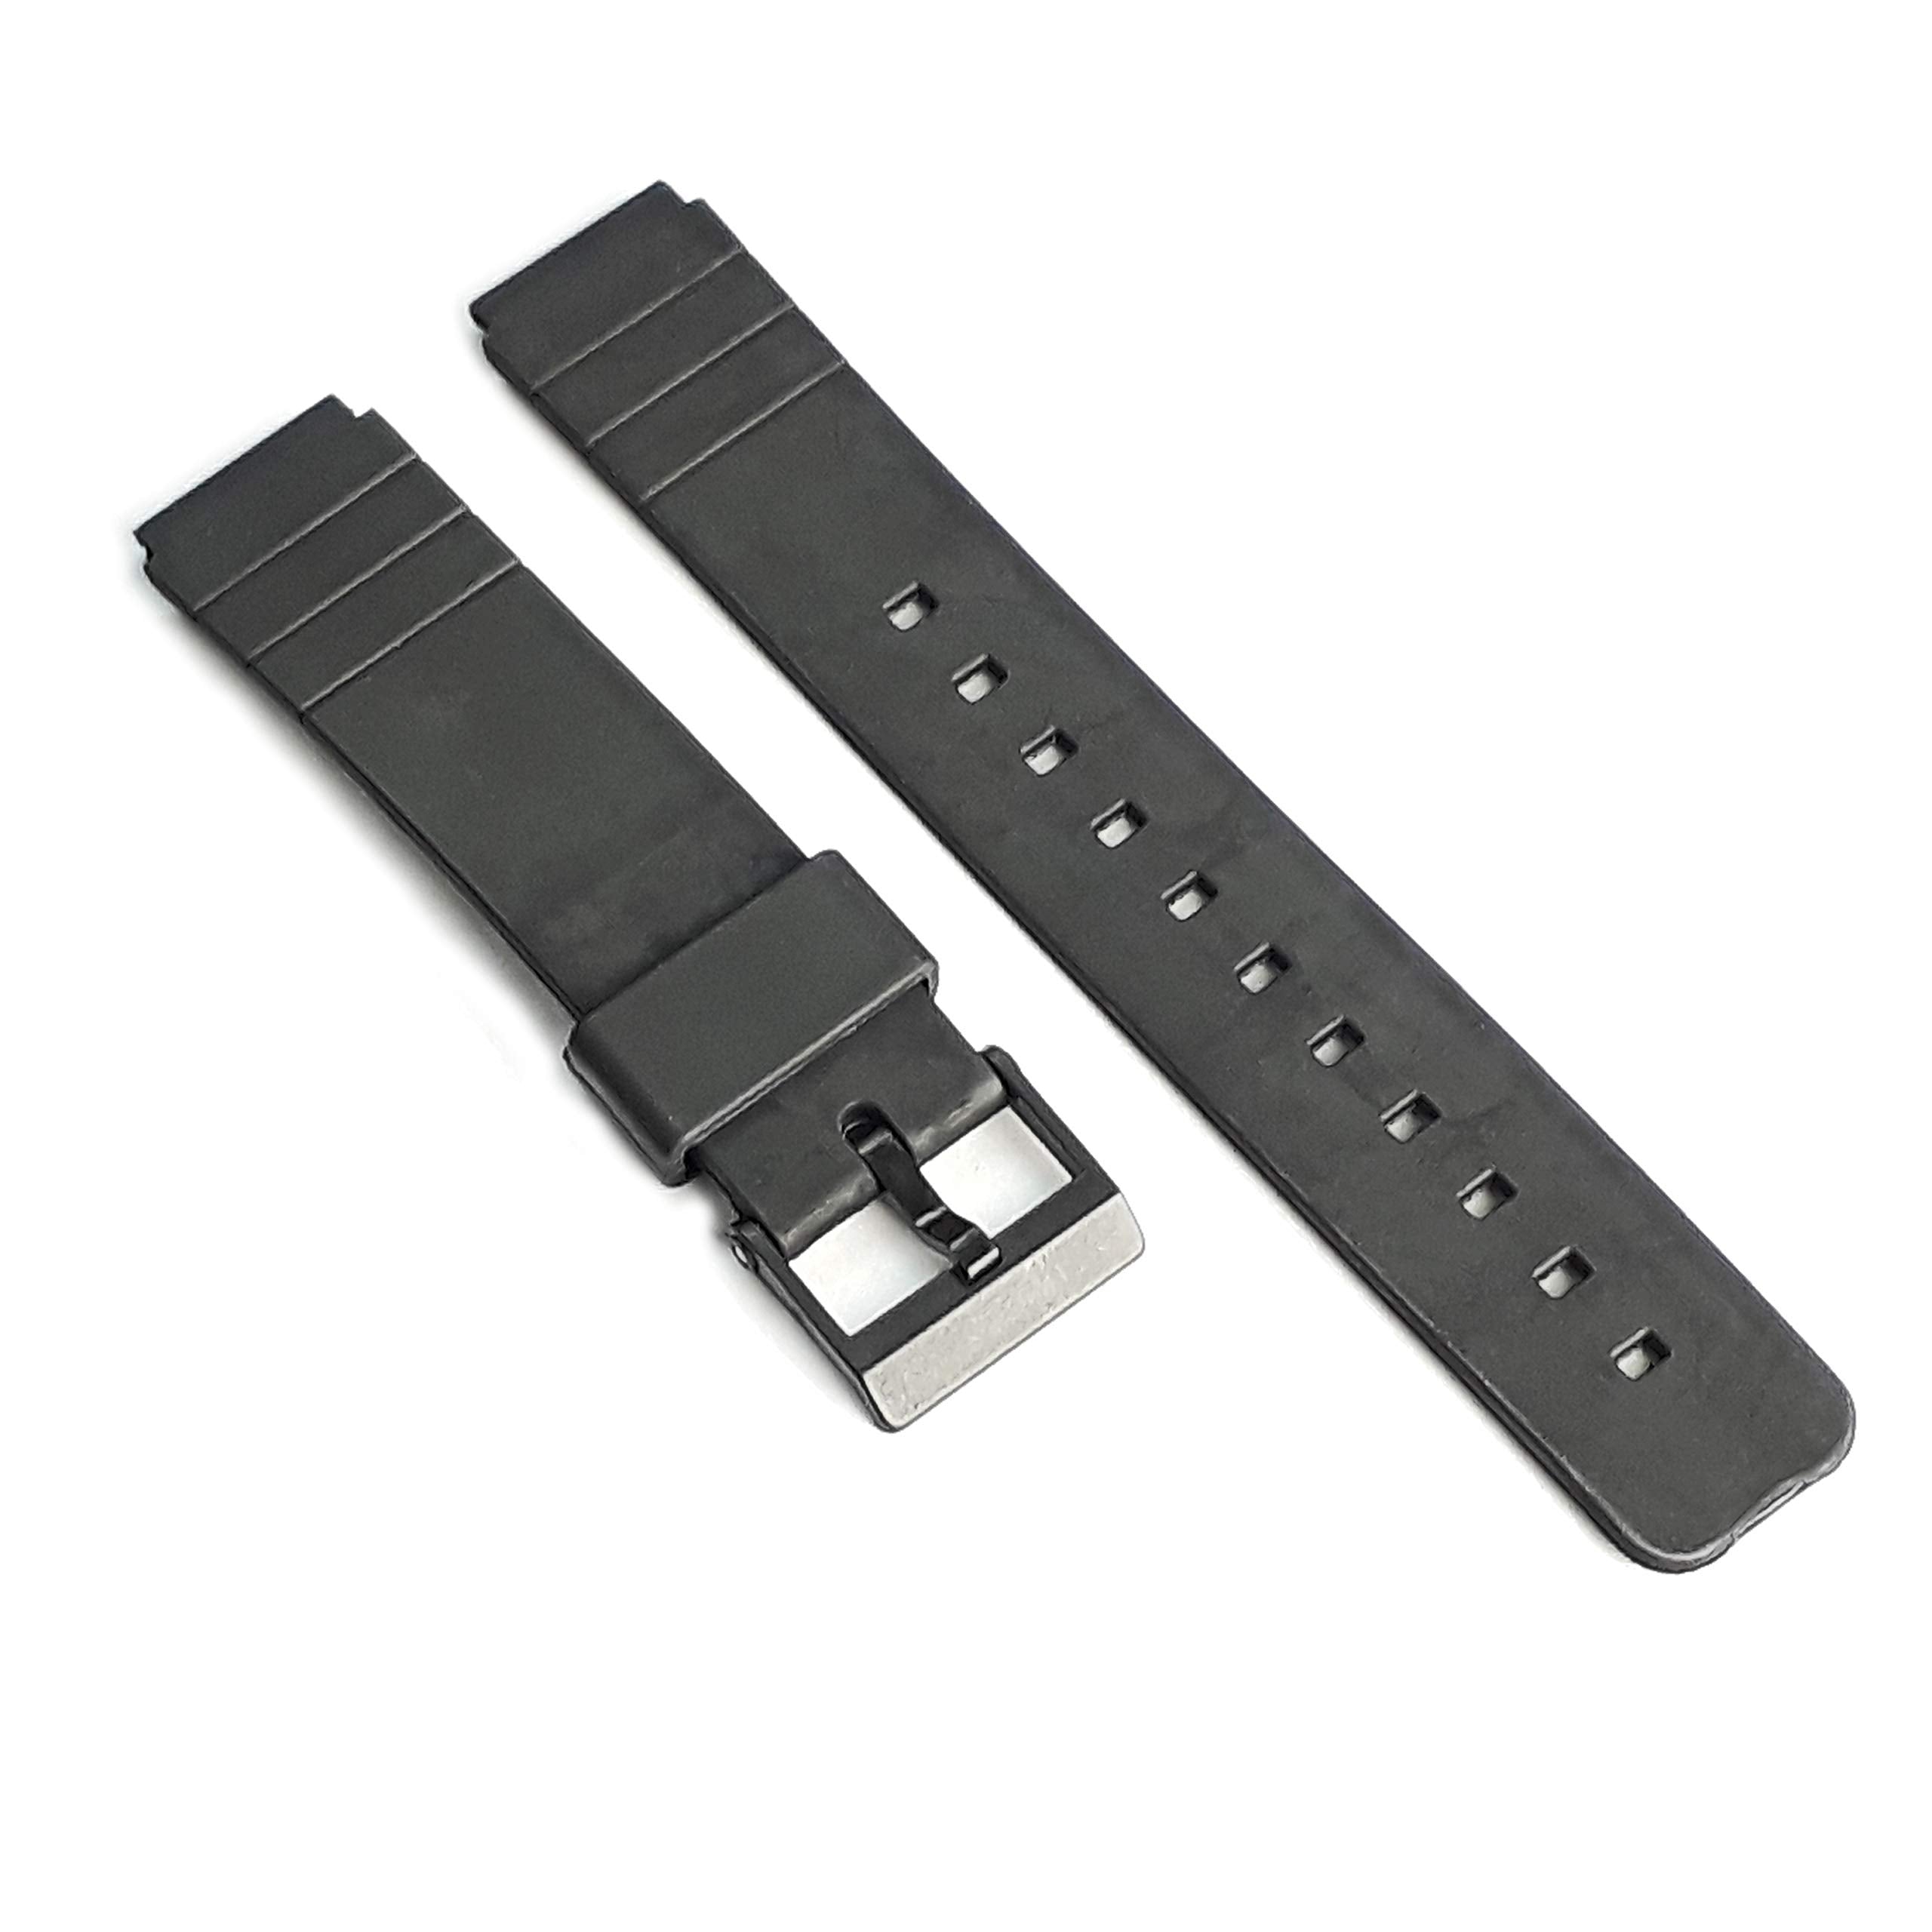 Replacement Watch Strap Band for Casio MQ24 Black Soft Resin